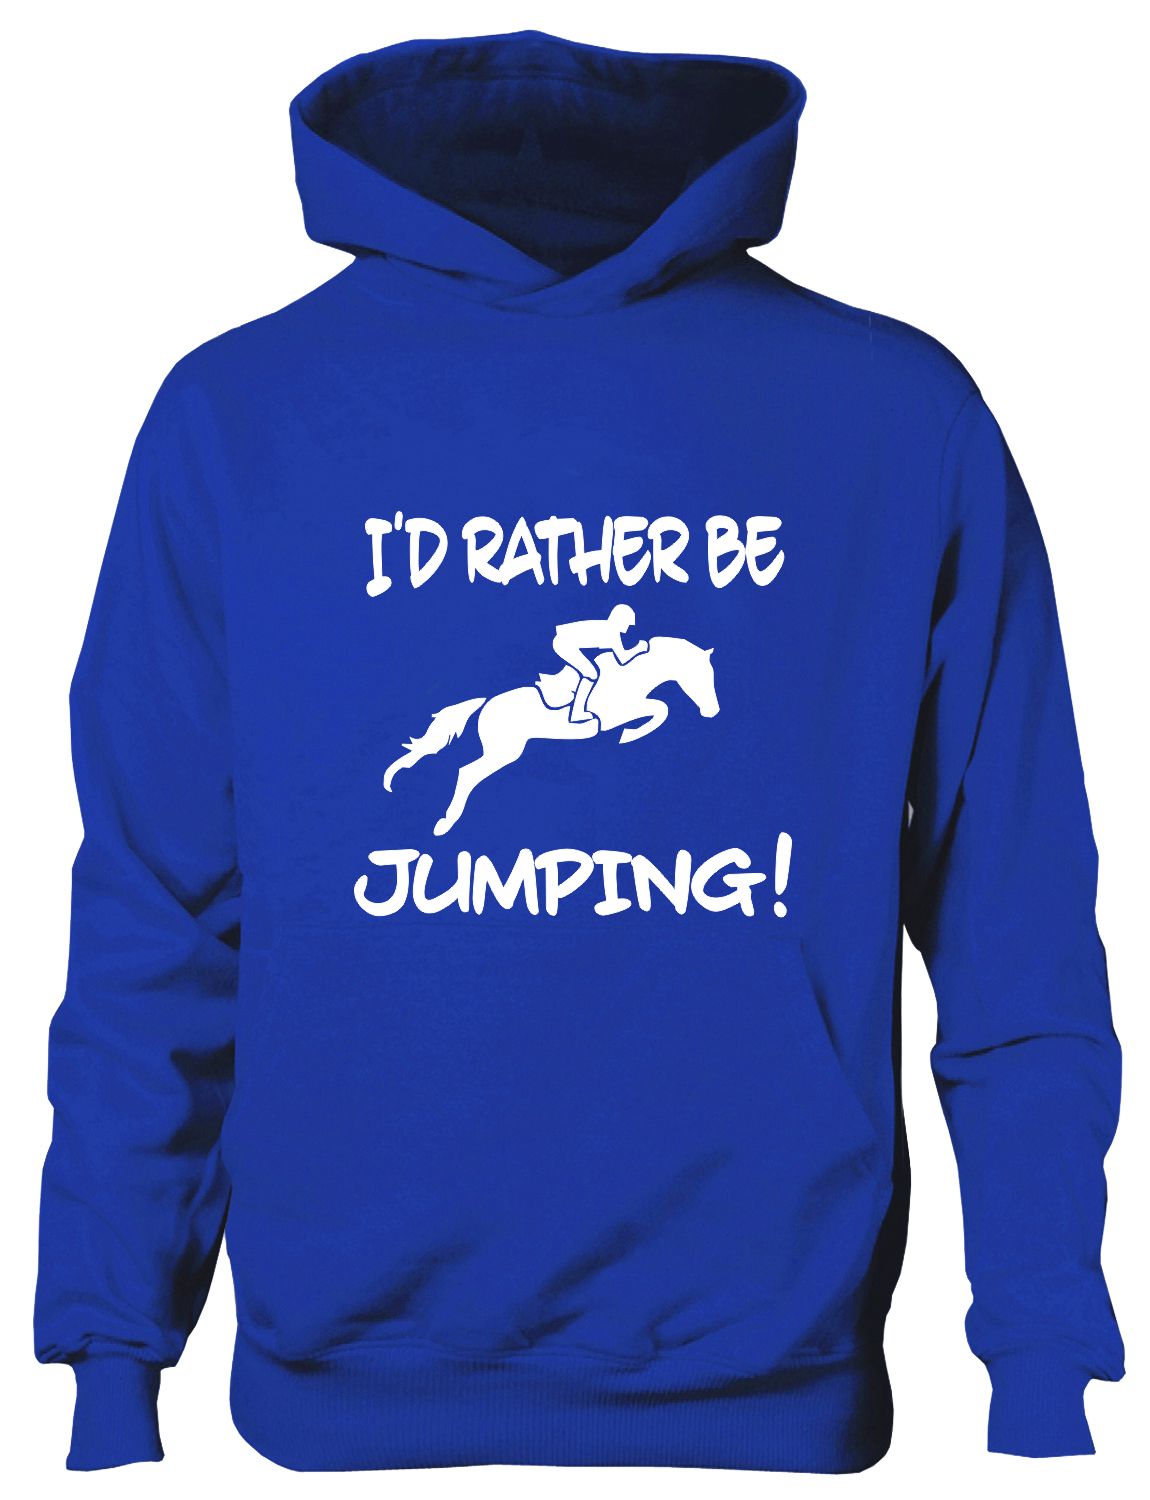 I'd Rather Be Jumping On My Horse Equesterian Pony Kids Hoodie